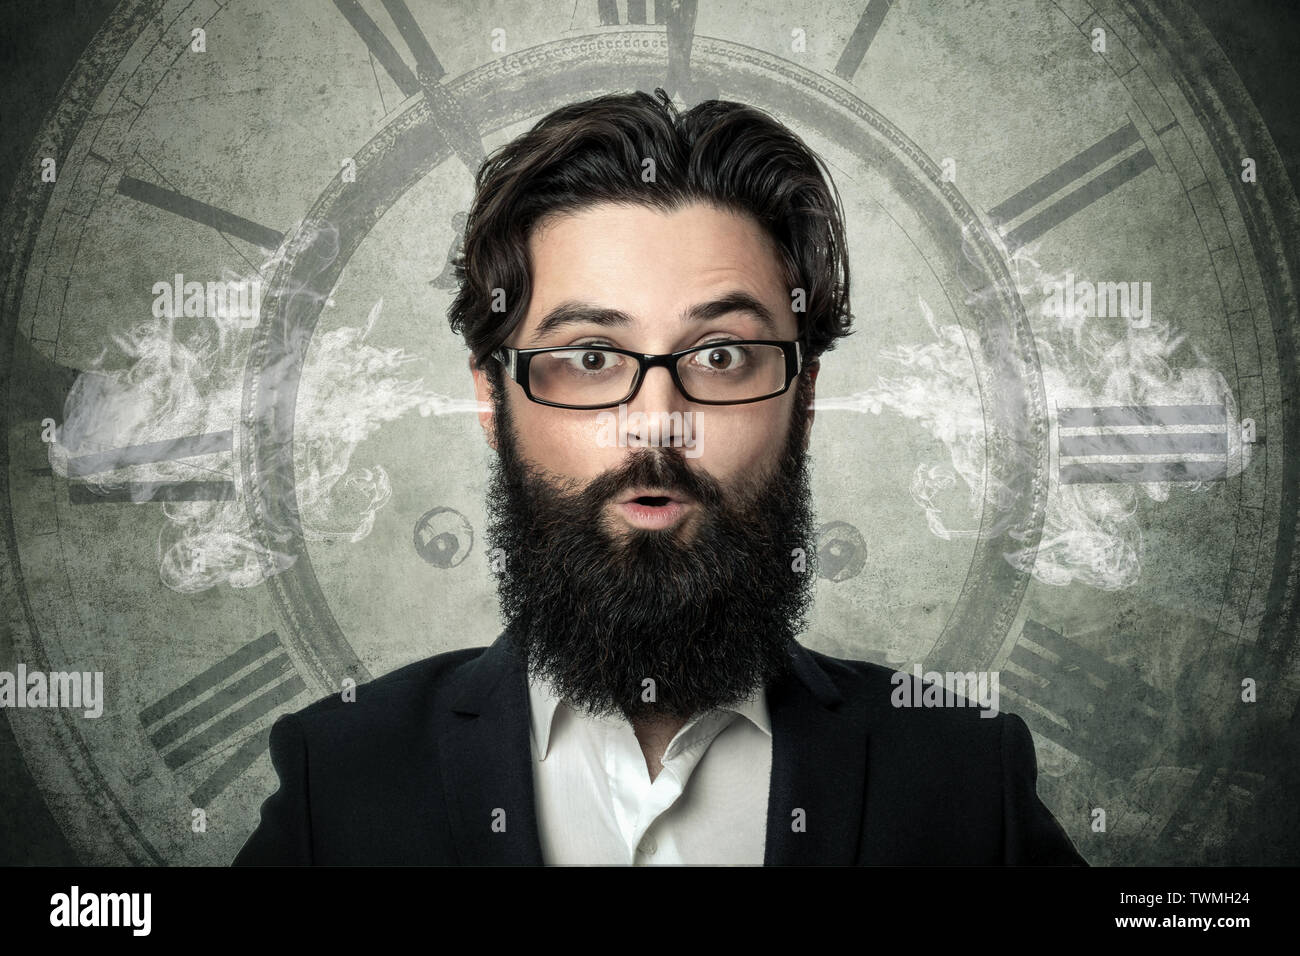 bearded surprised man, blowing steam coming out of ears, over clock background, concept of transience of time, fatigue from lack of hours in a day Stock Photo